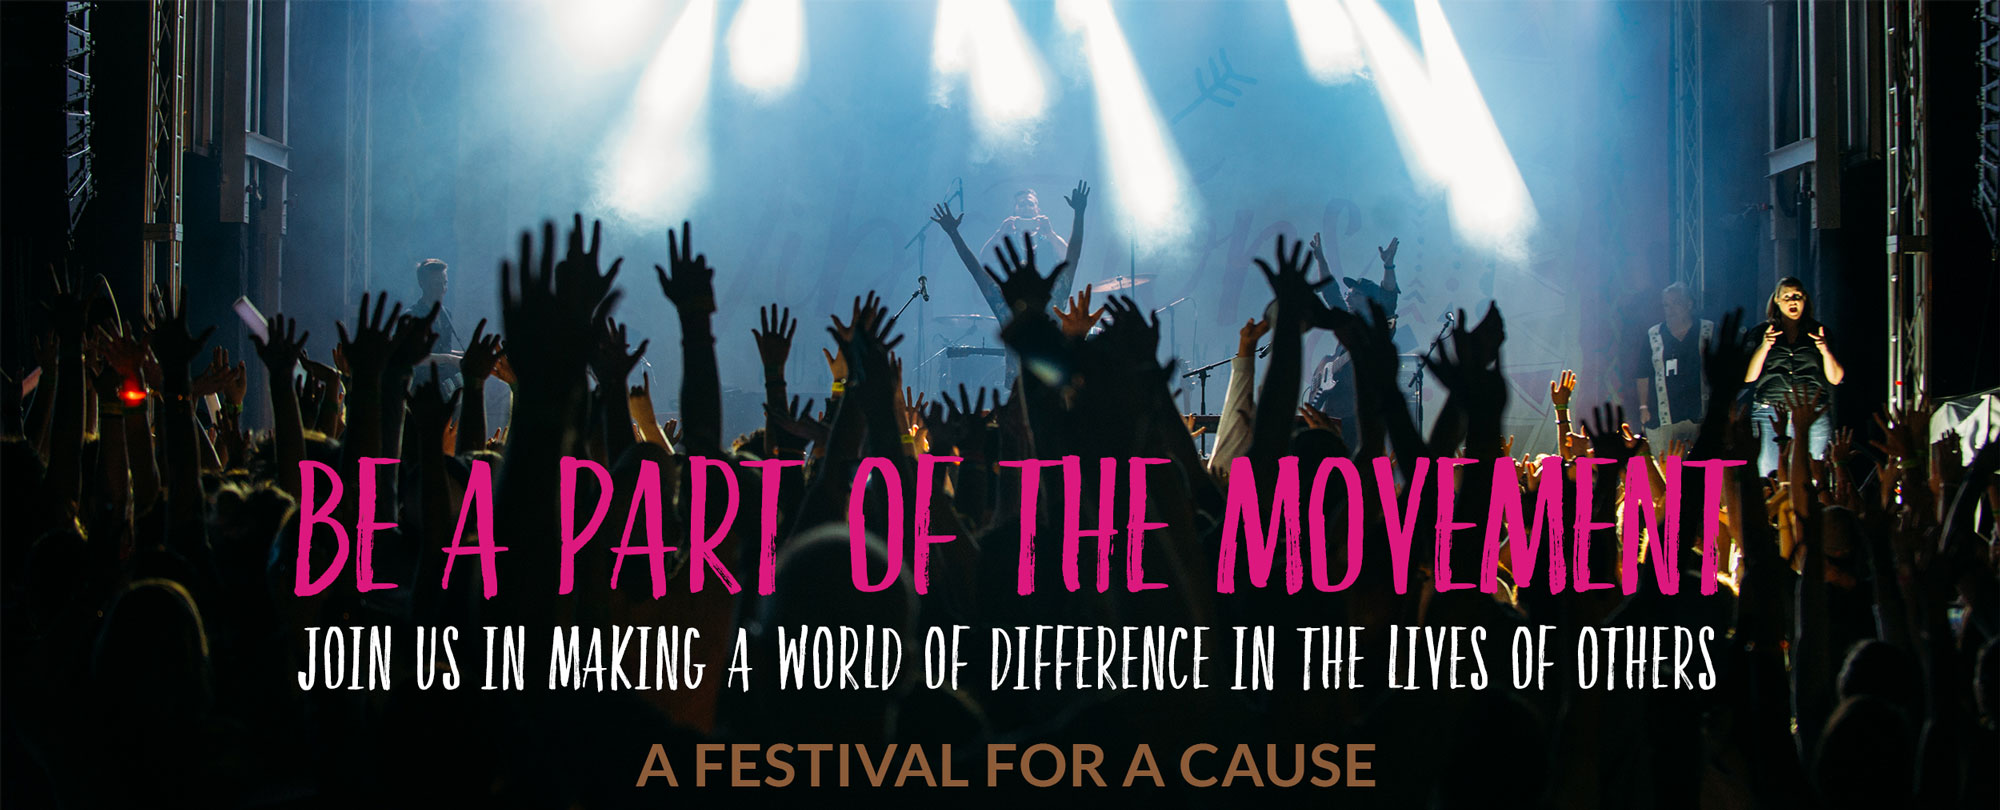 Be a part of the movement - Join us in making a world of difference in the lives of others. A Festival for a cause